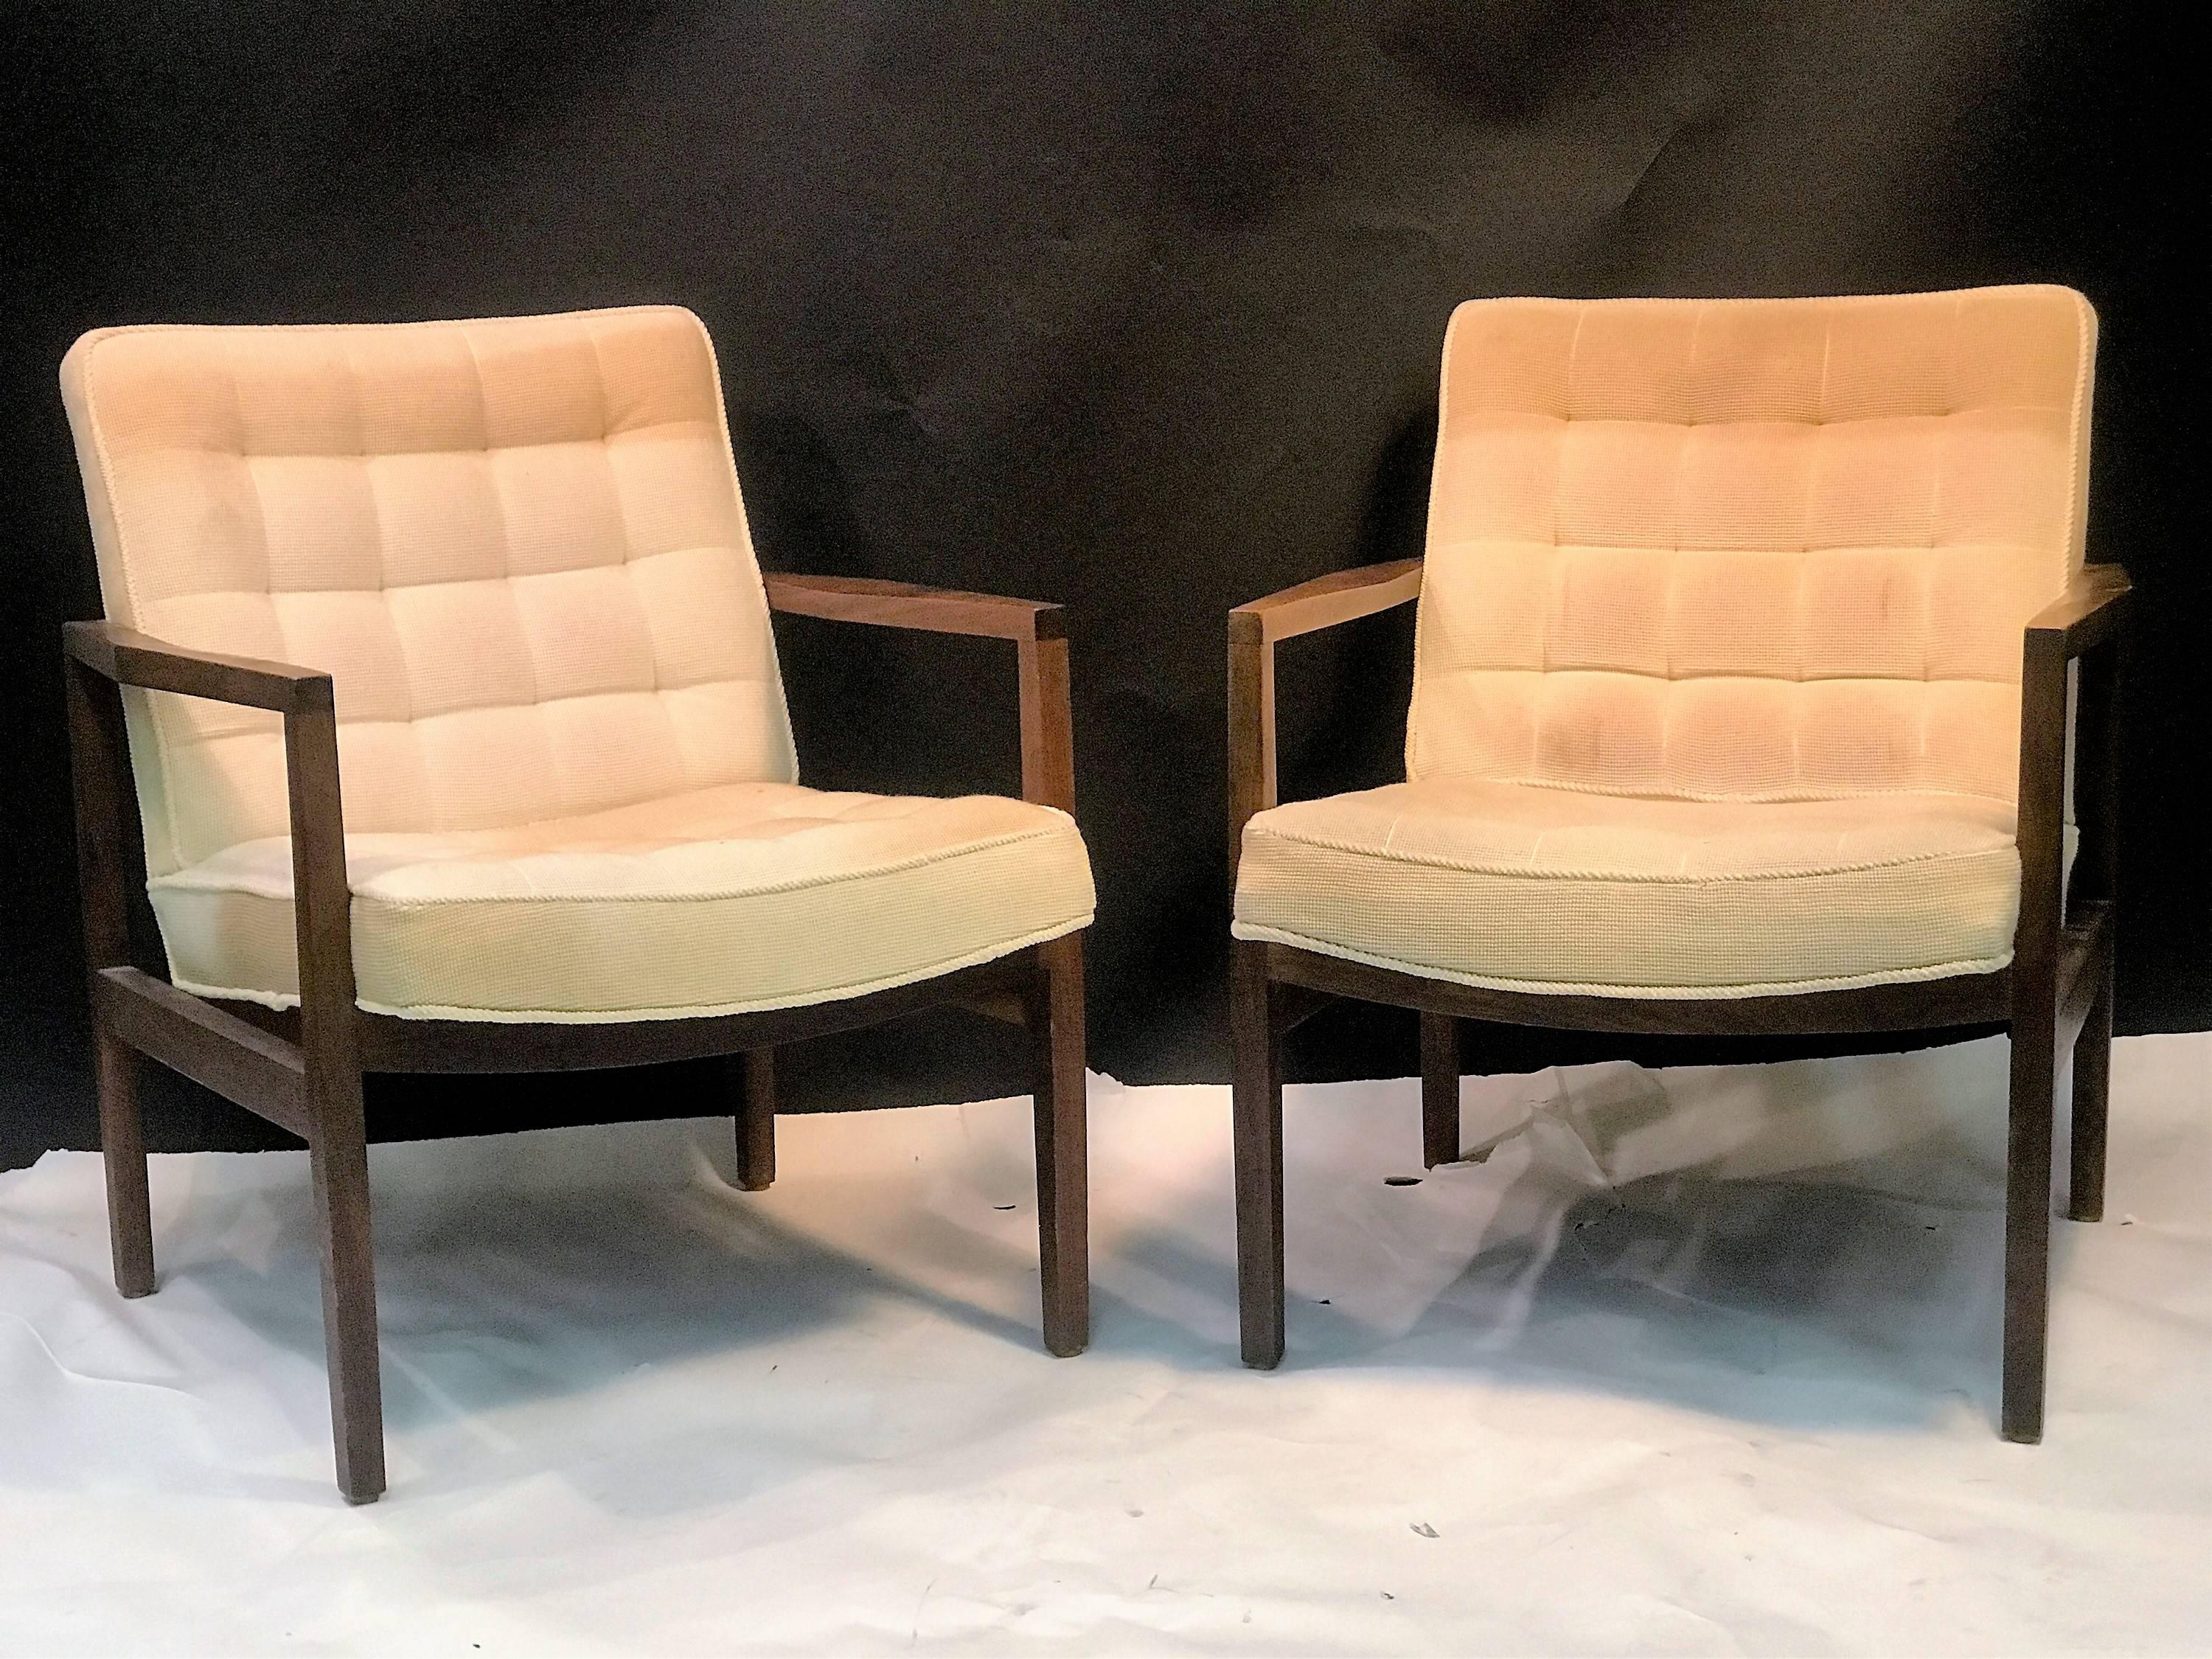 Sharp Pair of Mid-Century Modern Armchairs Attributed to Edward Wormley For Sale 1